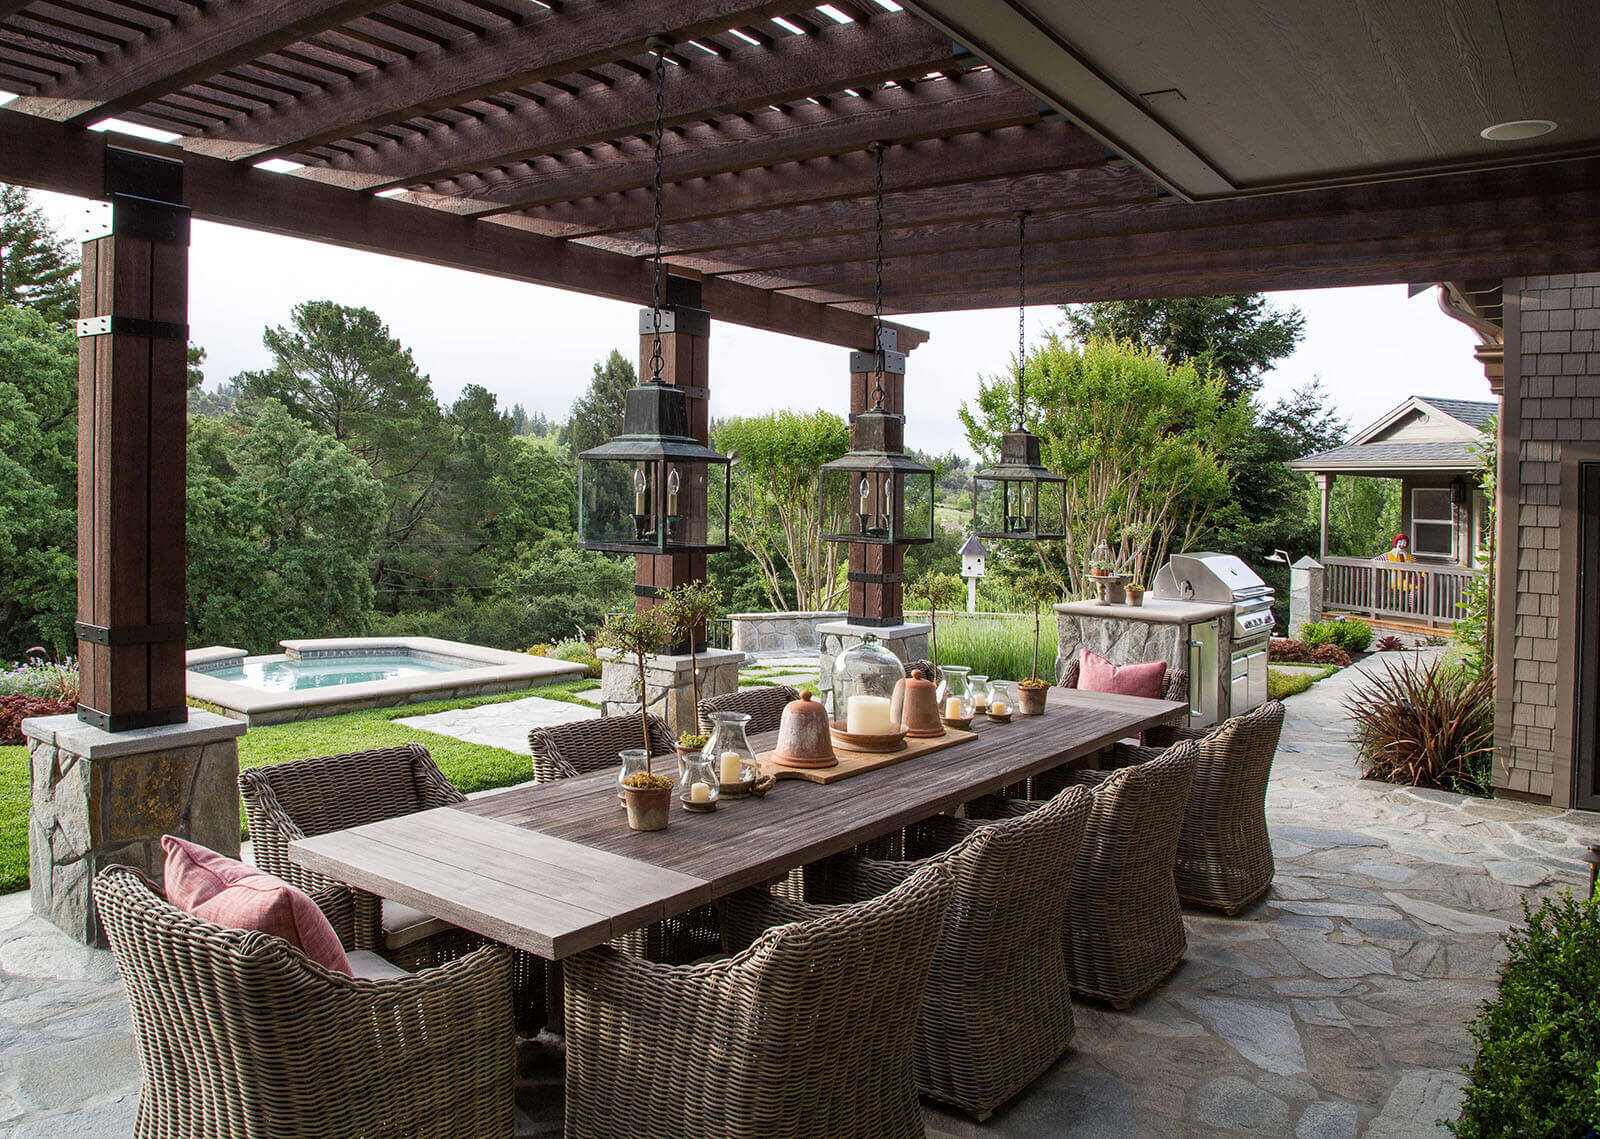 Pergola-covered stone dining patio with rustic table and rattan chairs and chandeliers